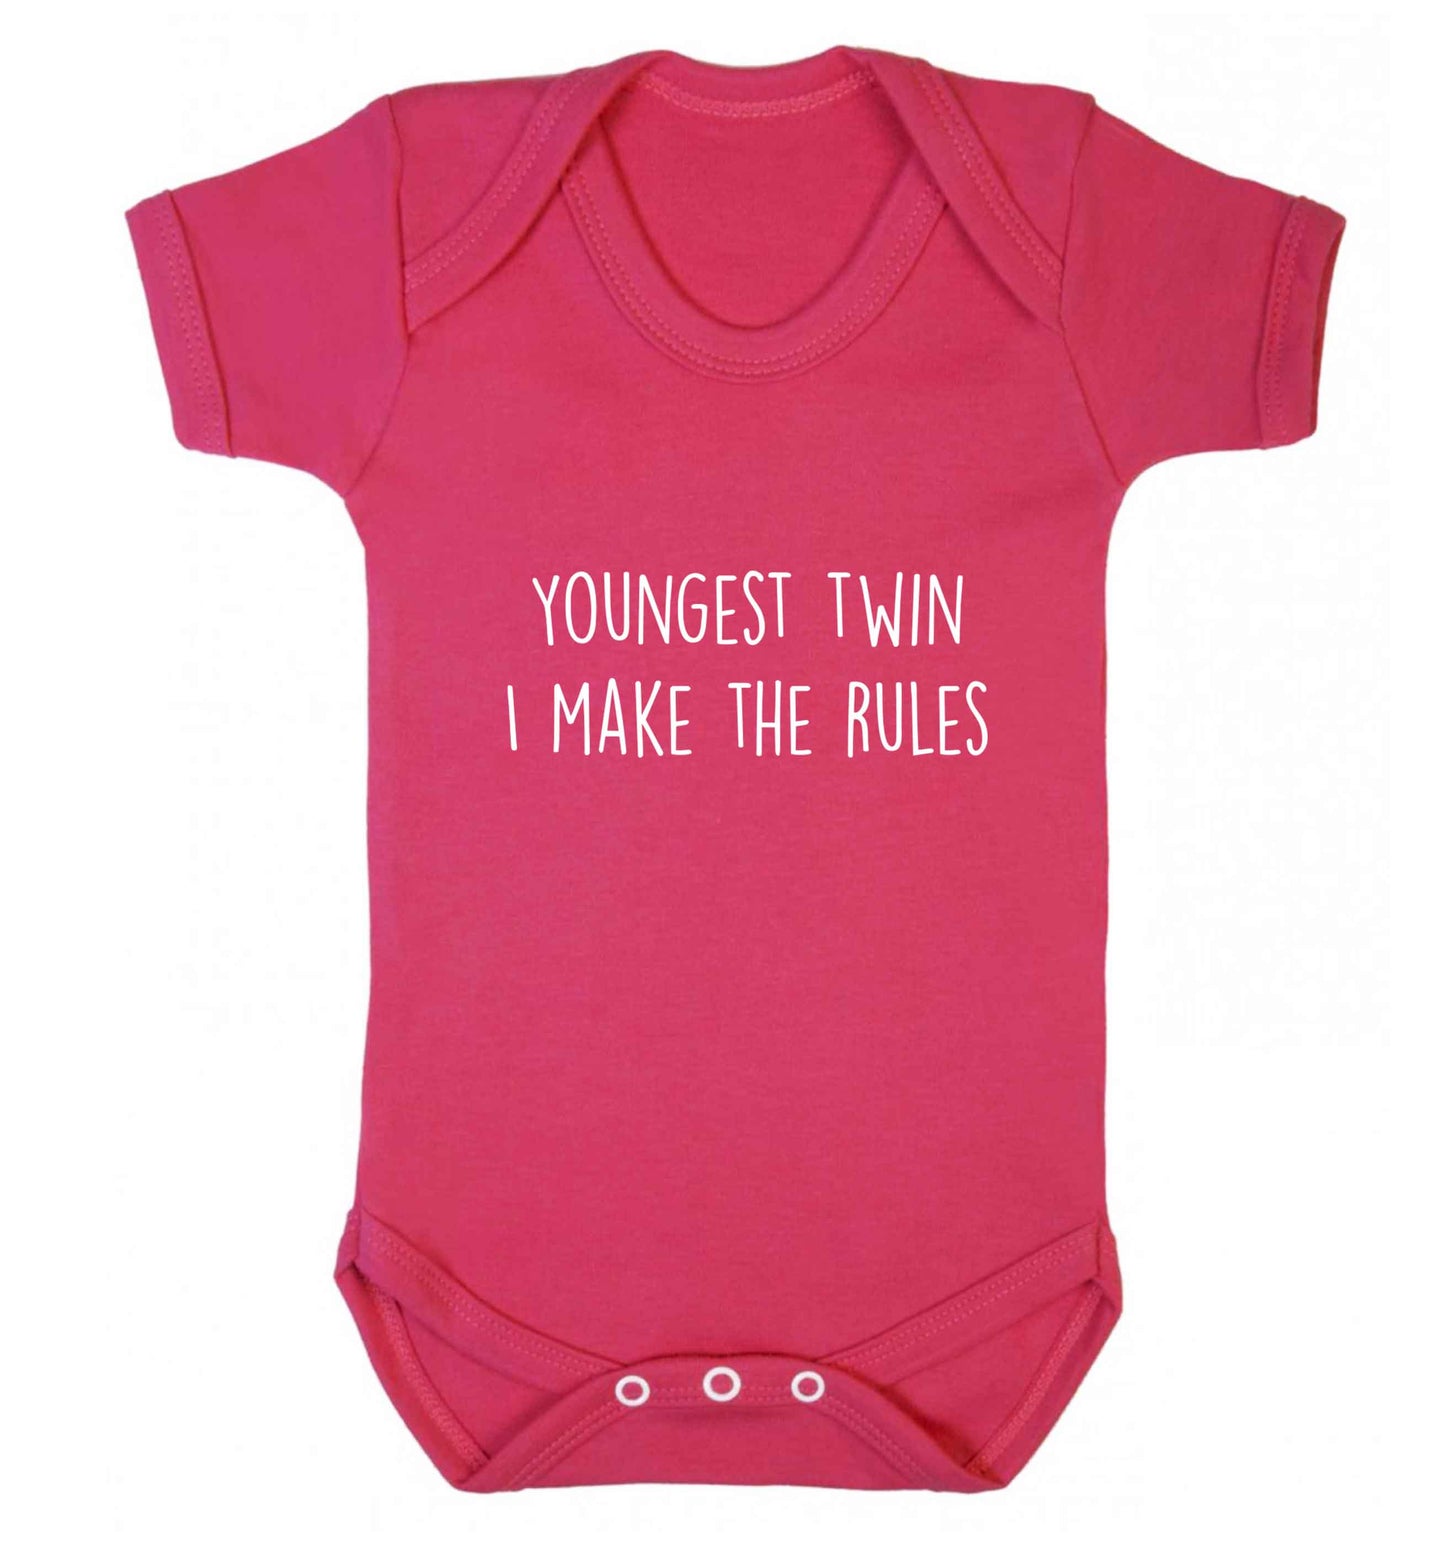 Youngest twin I make the rules baby vest dark pink 18-24 months